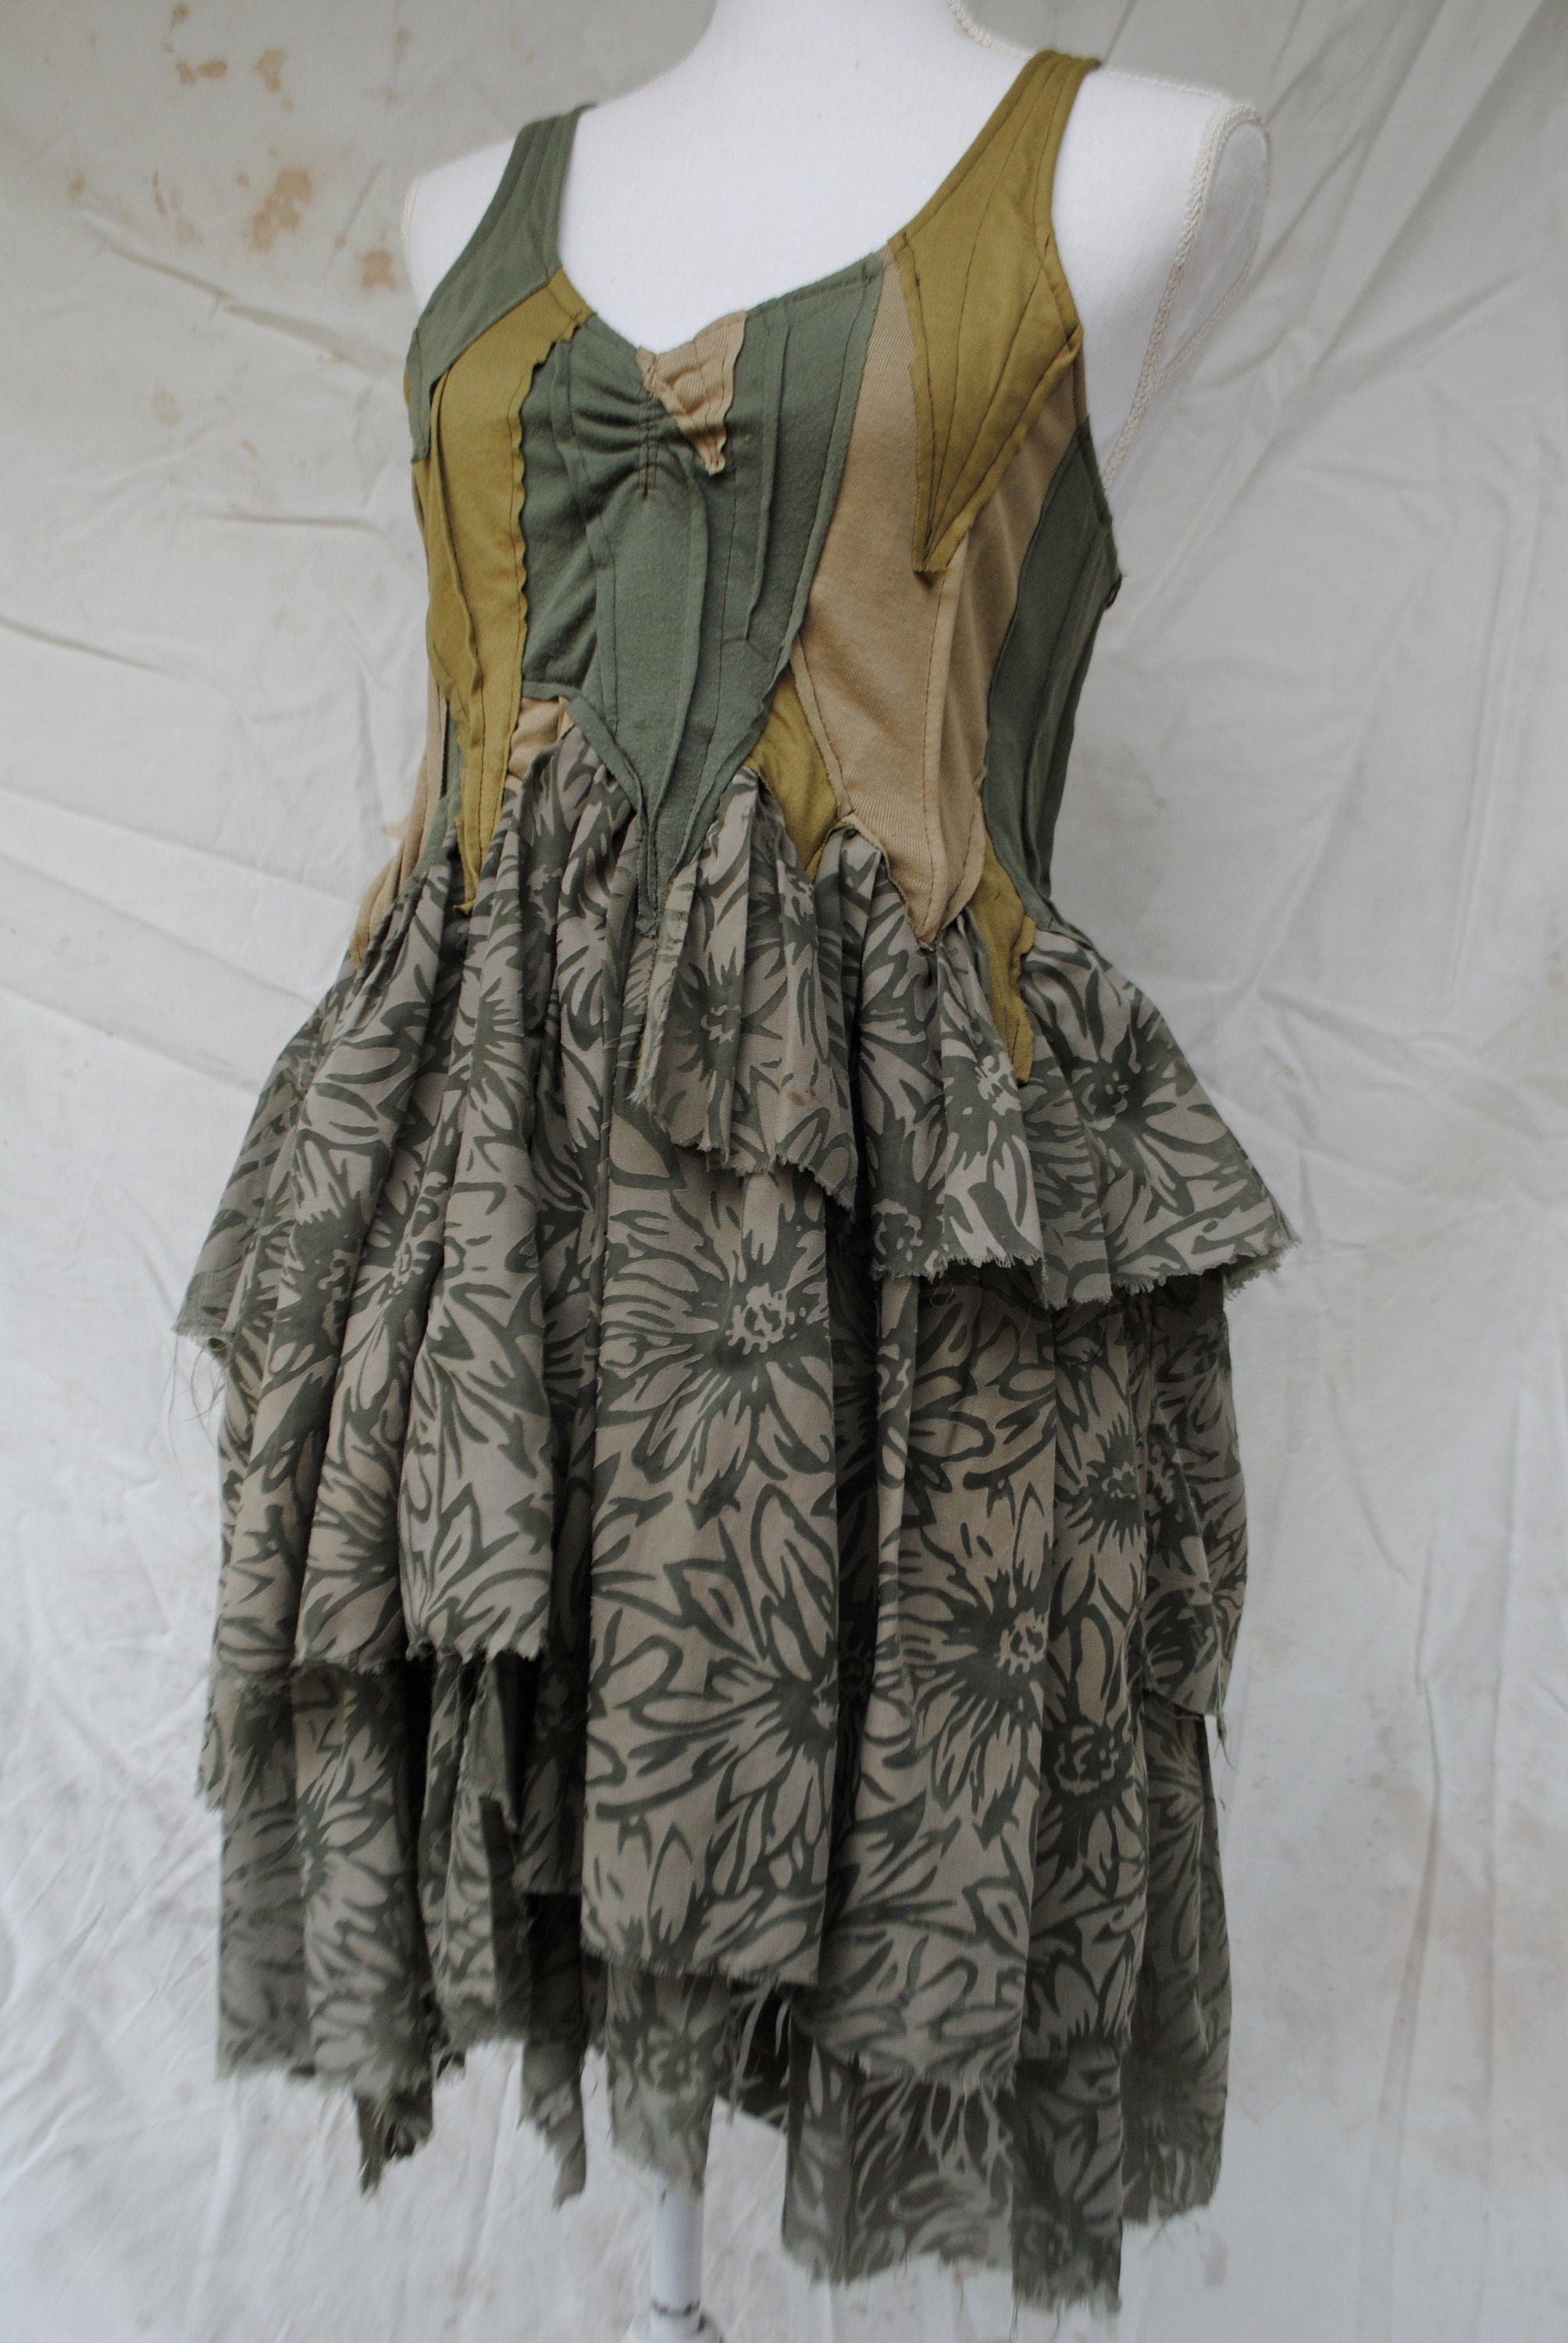 S Leafy Green Fairy Dress // Tattered Magical Clothing - Etsy